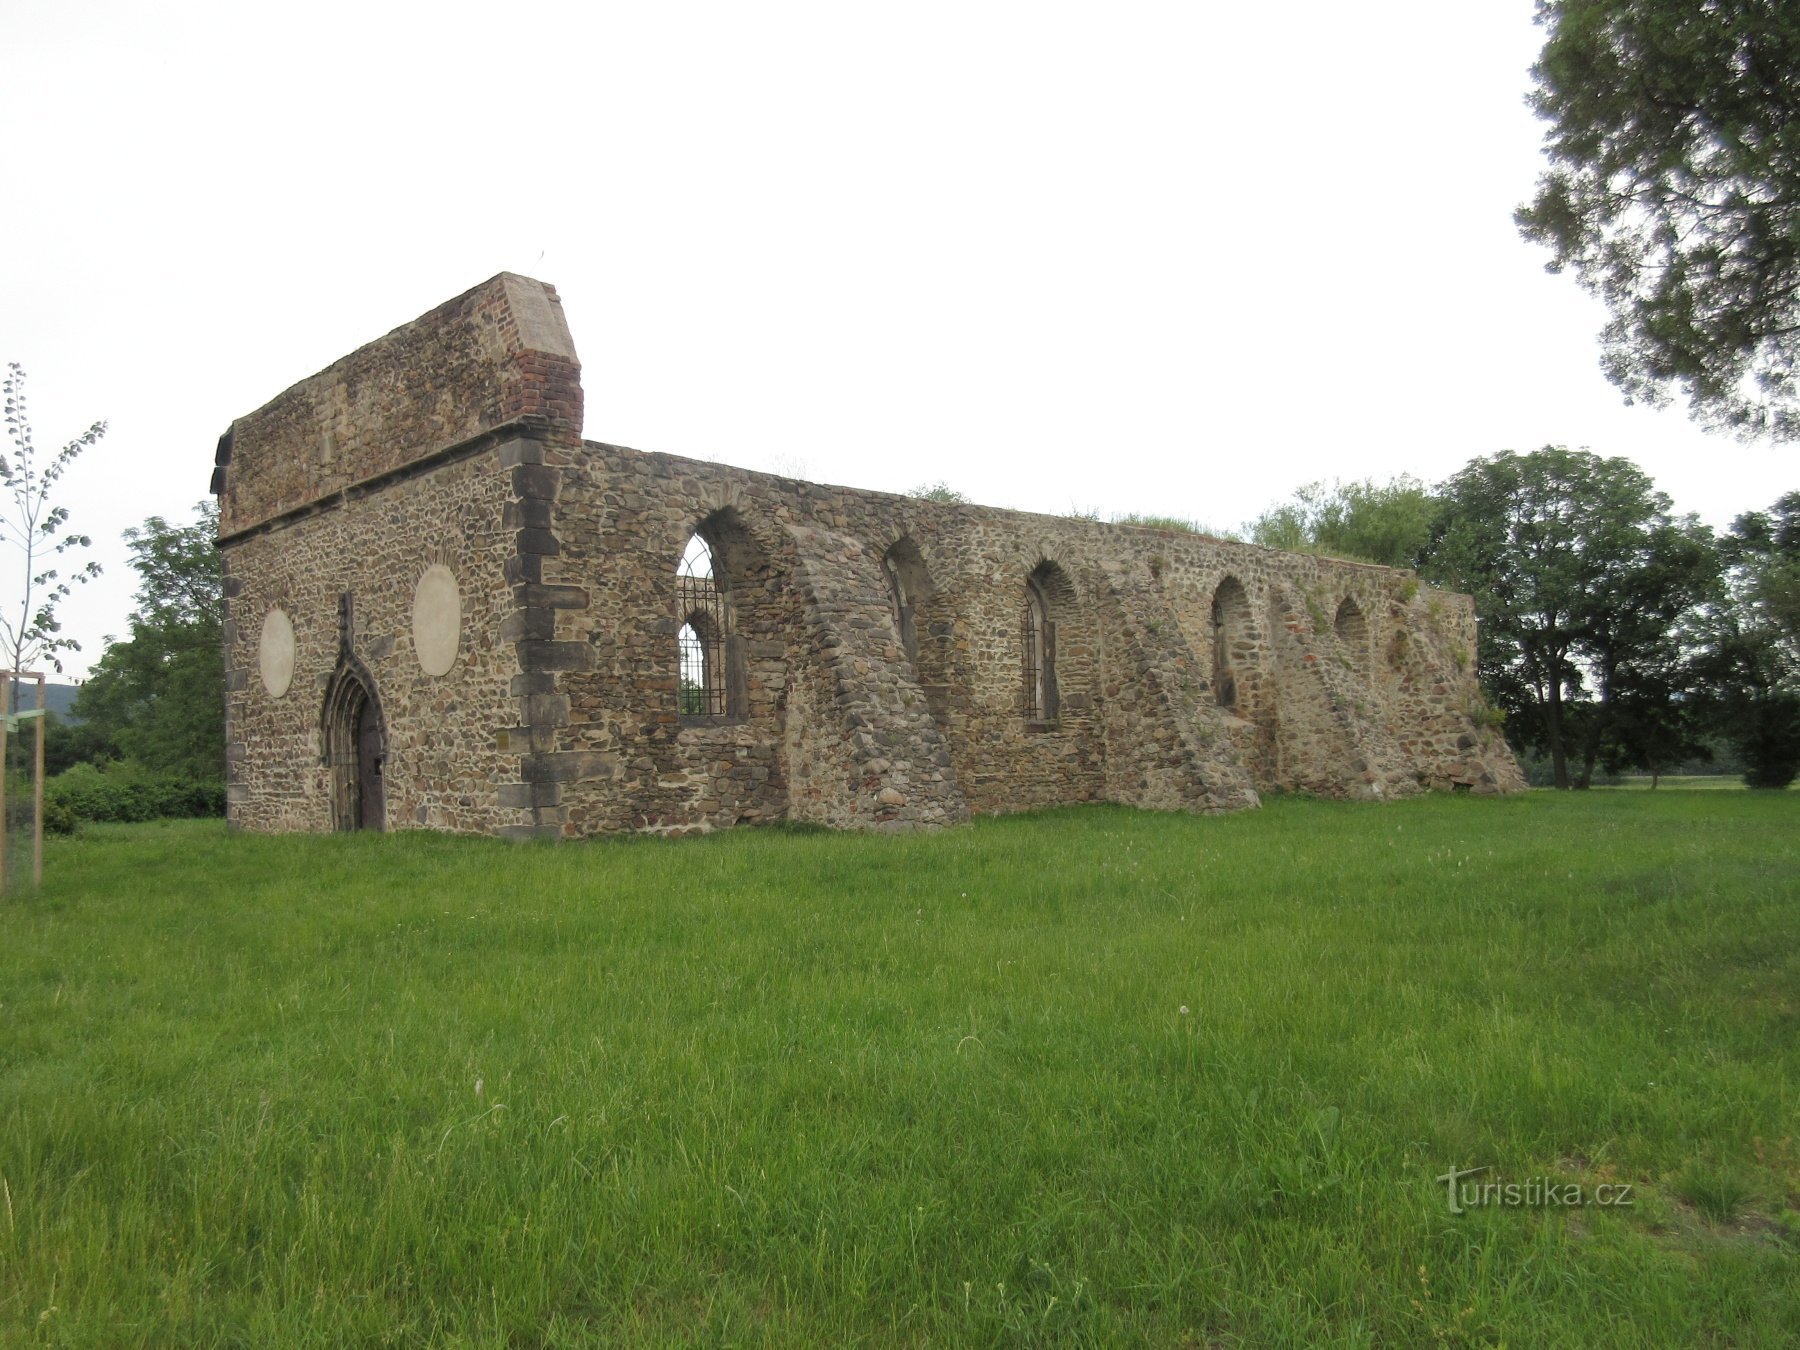 The ruins of the Gothic church of St. Procopius